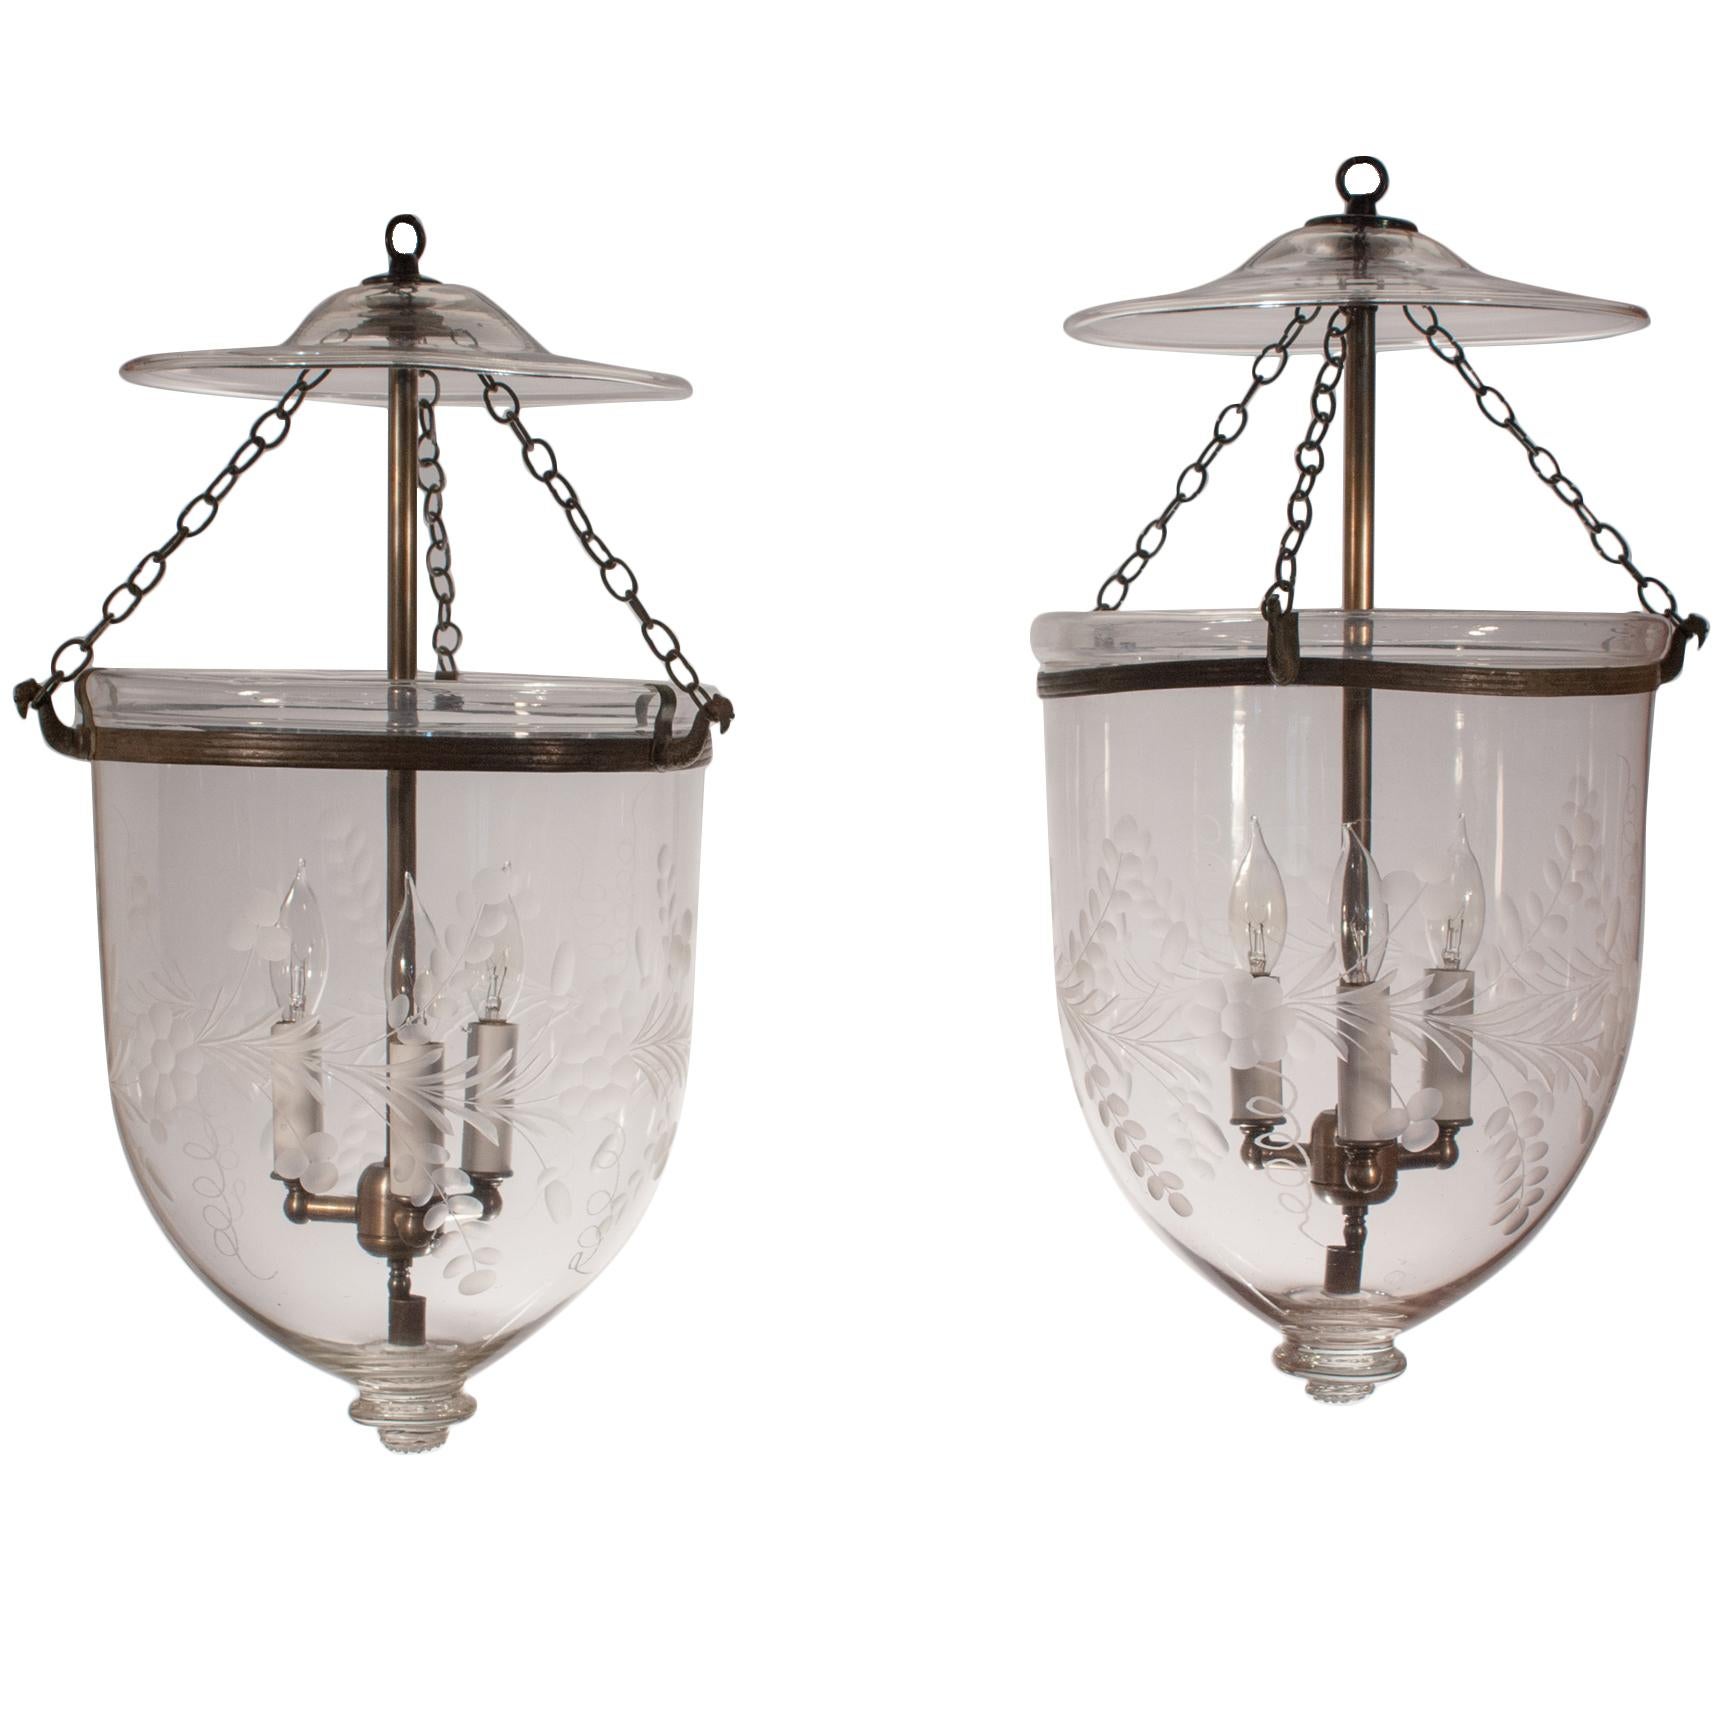 Pair of 19th Century Bell Jar Lanterns with Floral Etching